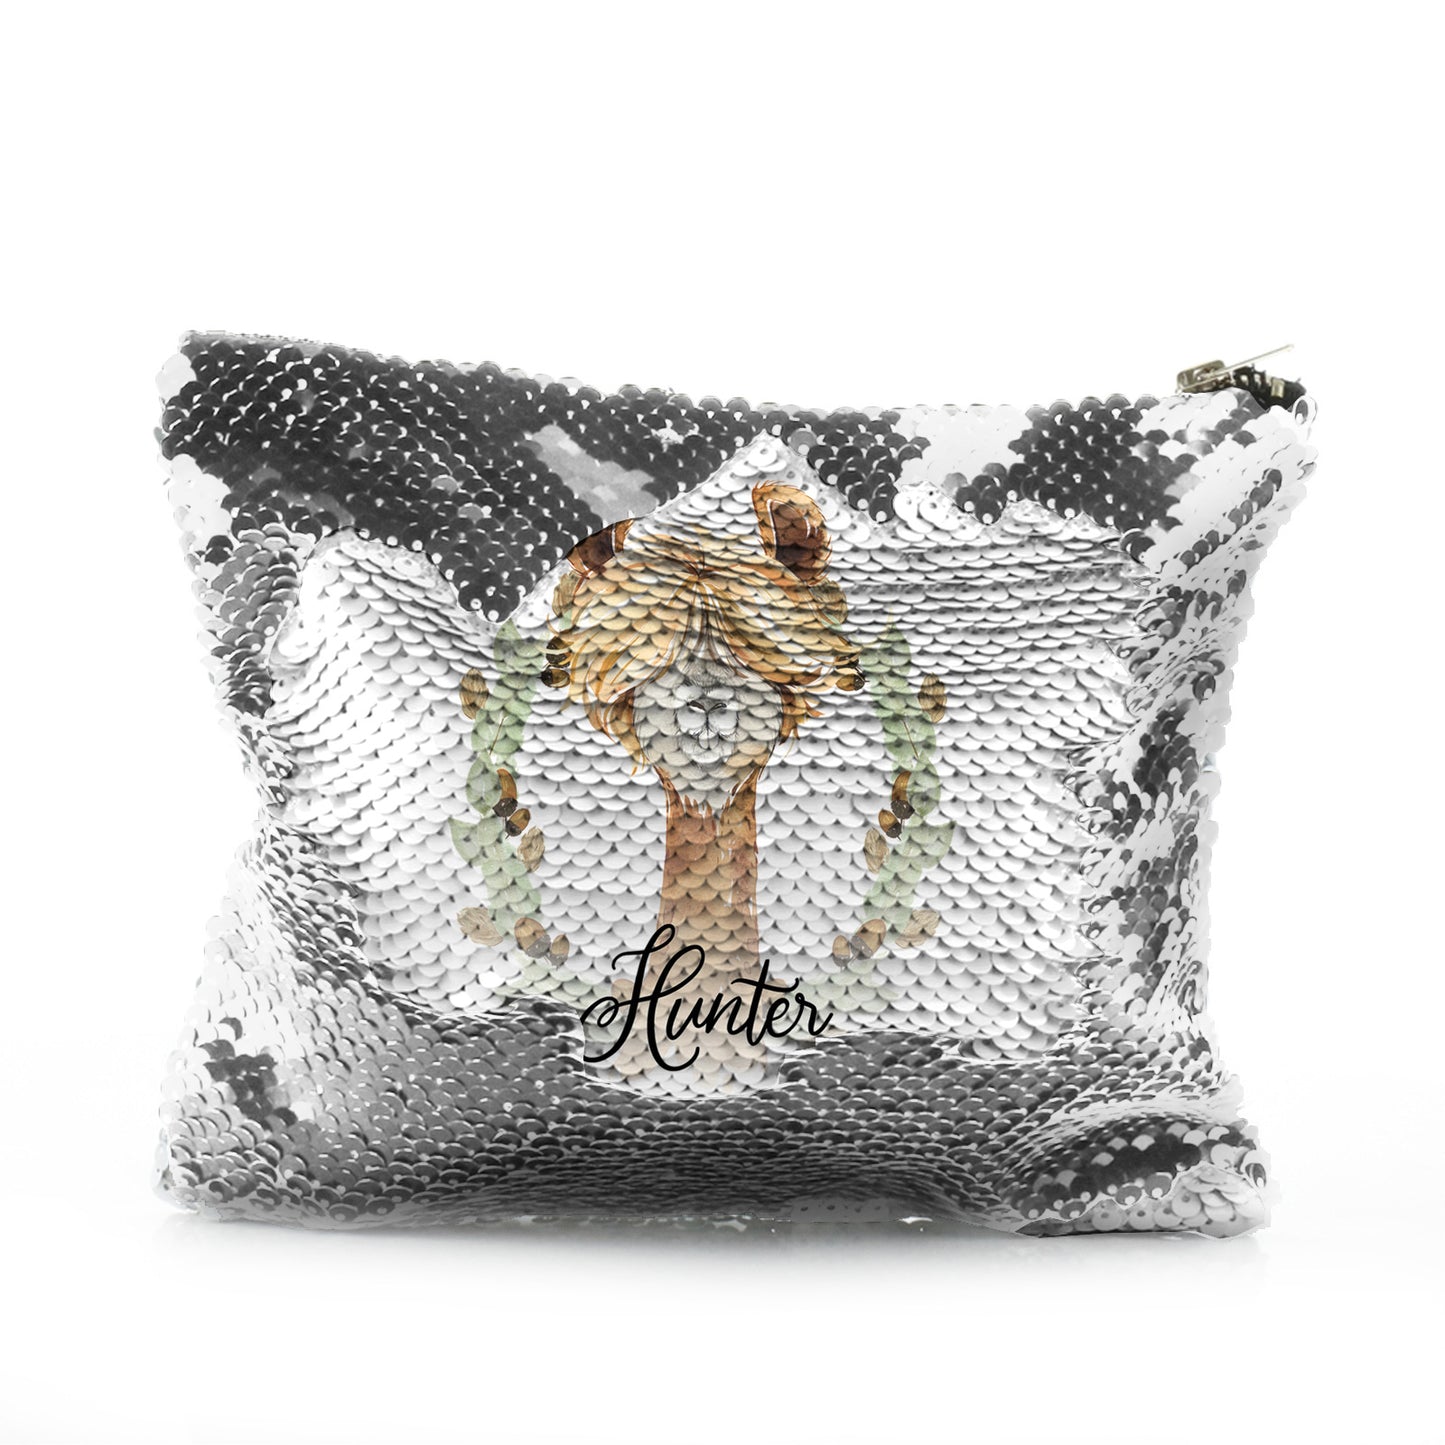 Personalised Sequin Zip Bag with Brown Alpaca Acorn Wreath and Cute Text